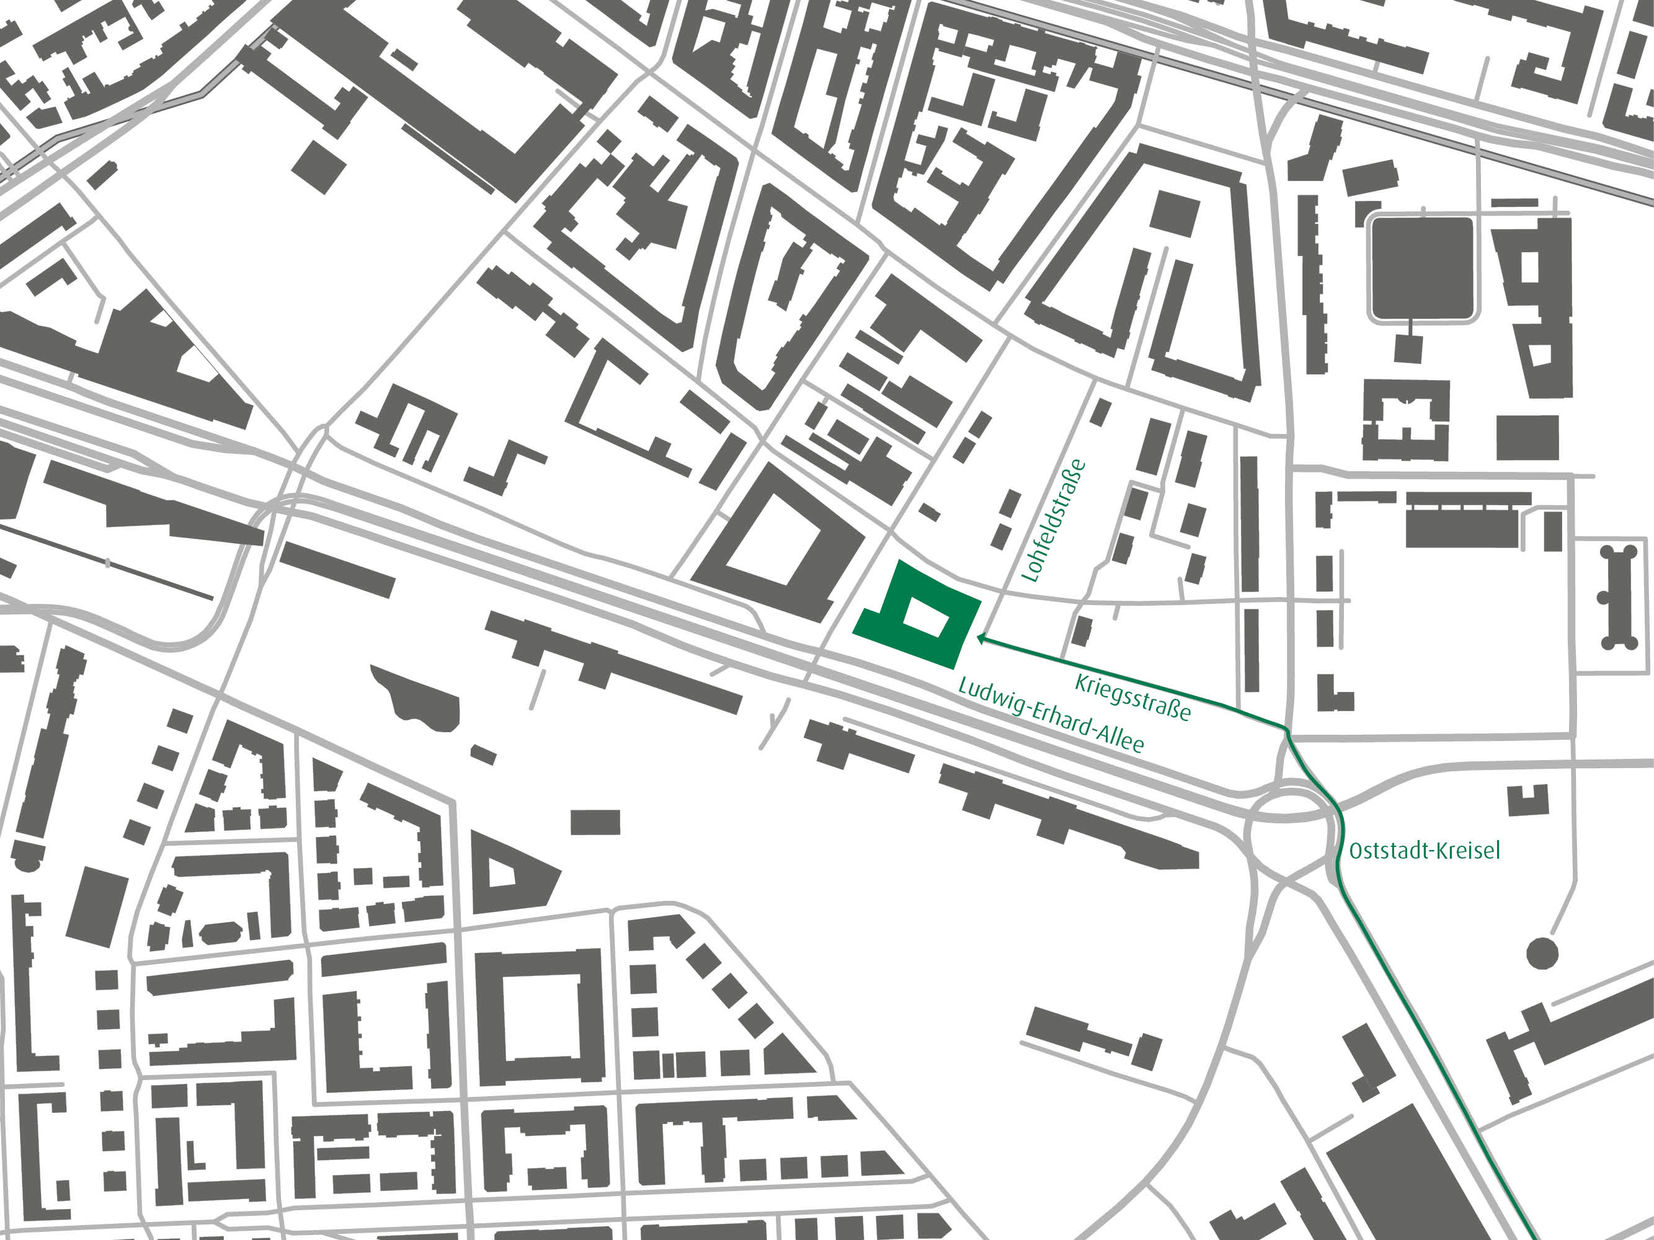 Directions to find the new weisenburger headquarters in Karlsruhe